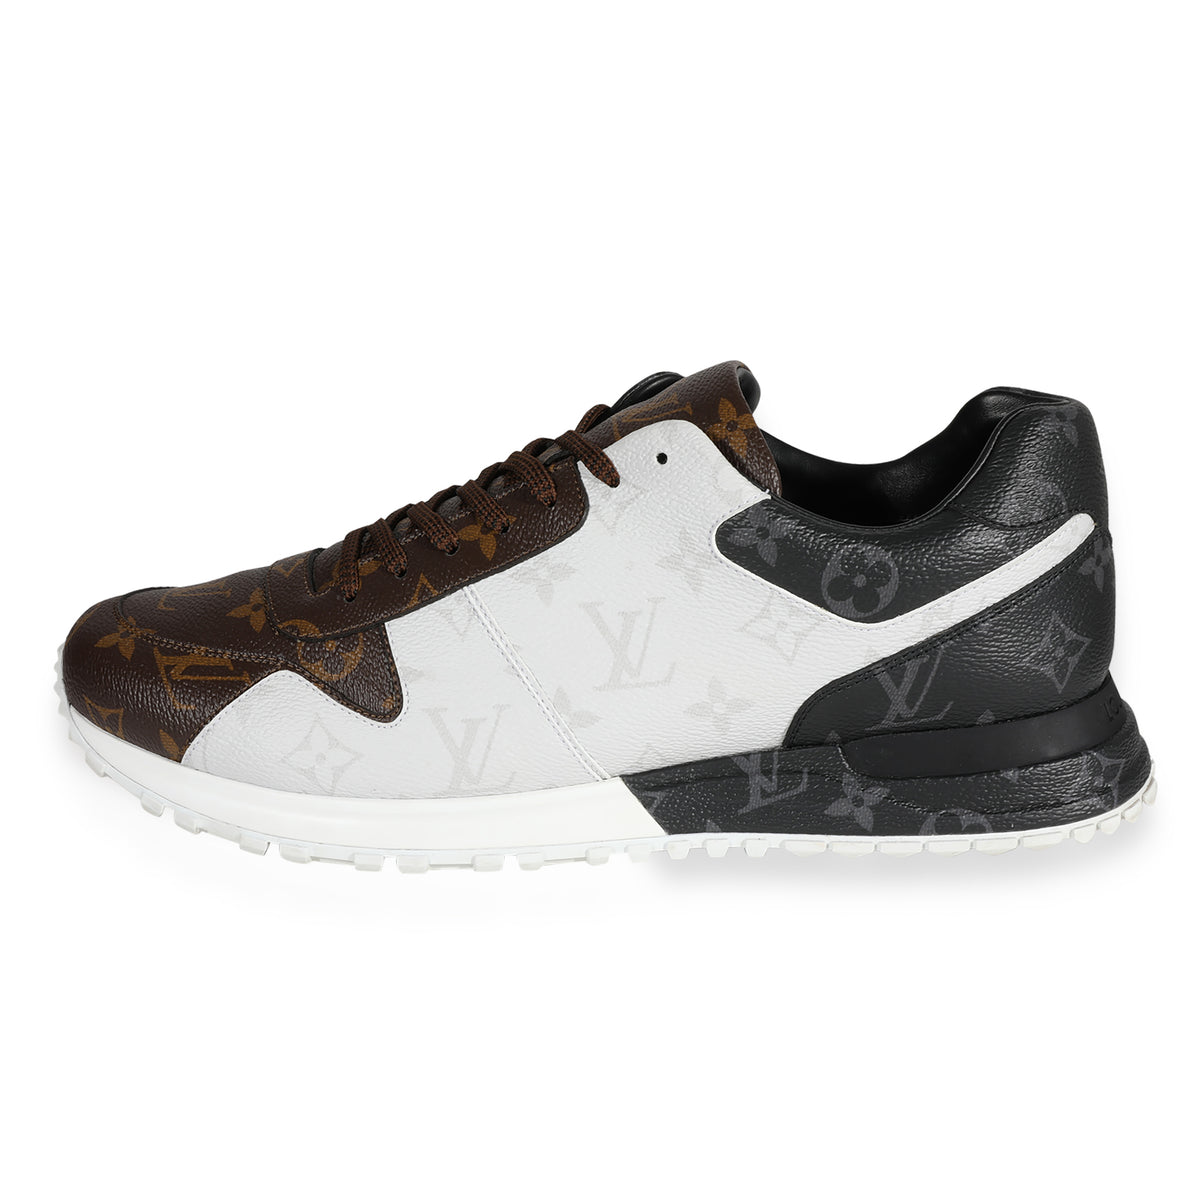 Louis Vuitton Mens sneakers size 12 $475 Designer Consigner is not  affiliated or associated with any brands we sell.